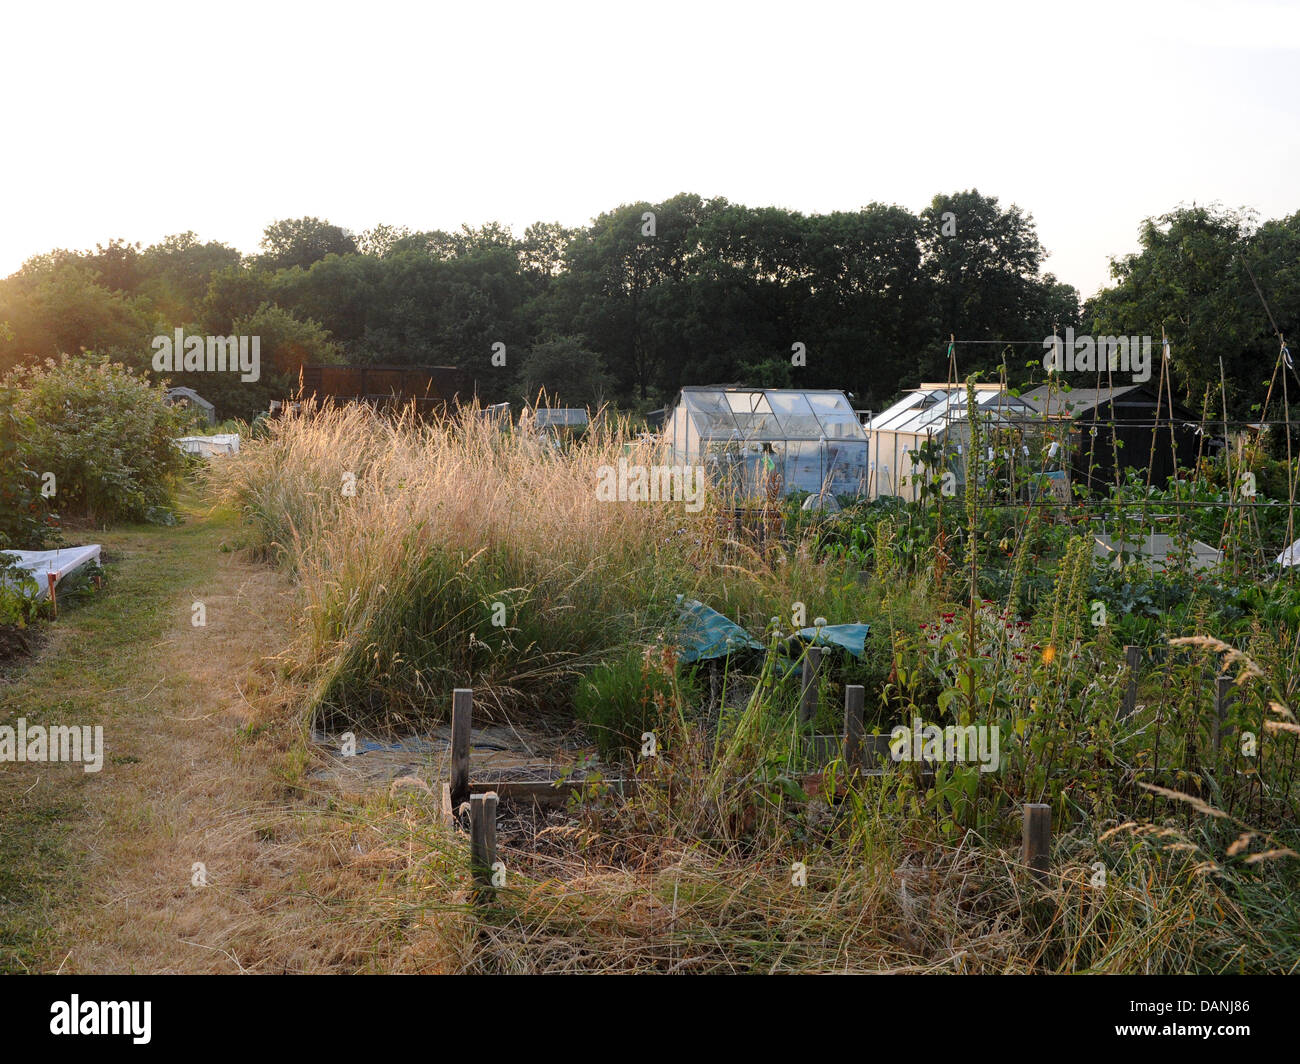 An allotment with an overgrown plot, a plot that's been unattended. Stock Photo